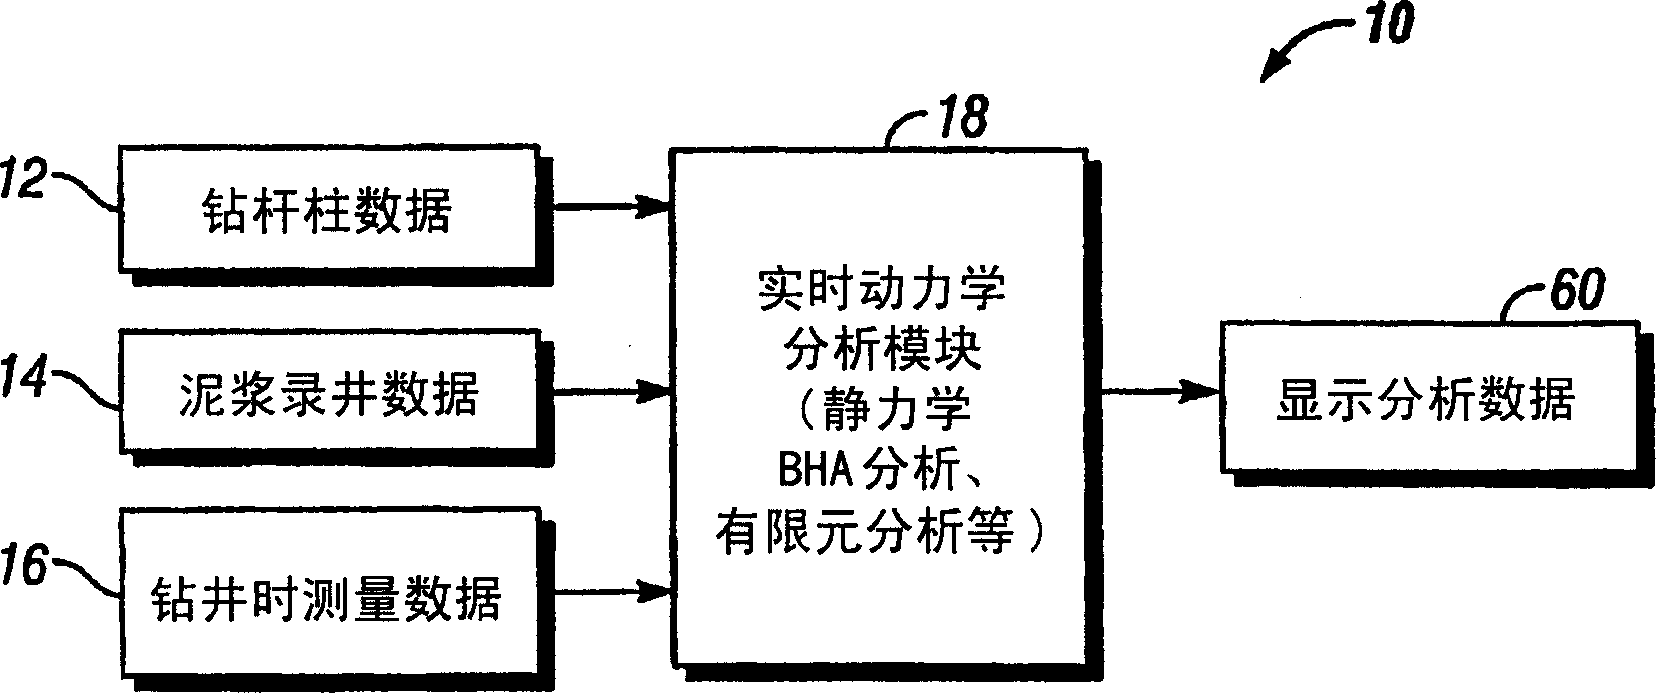 Integrated drilling dynamics system and method of operating same